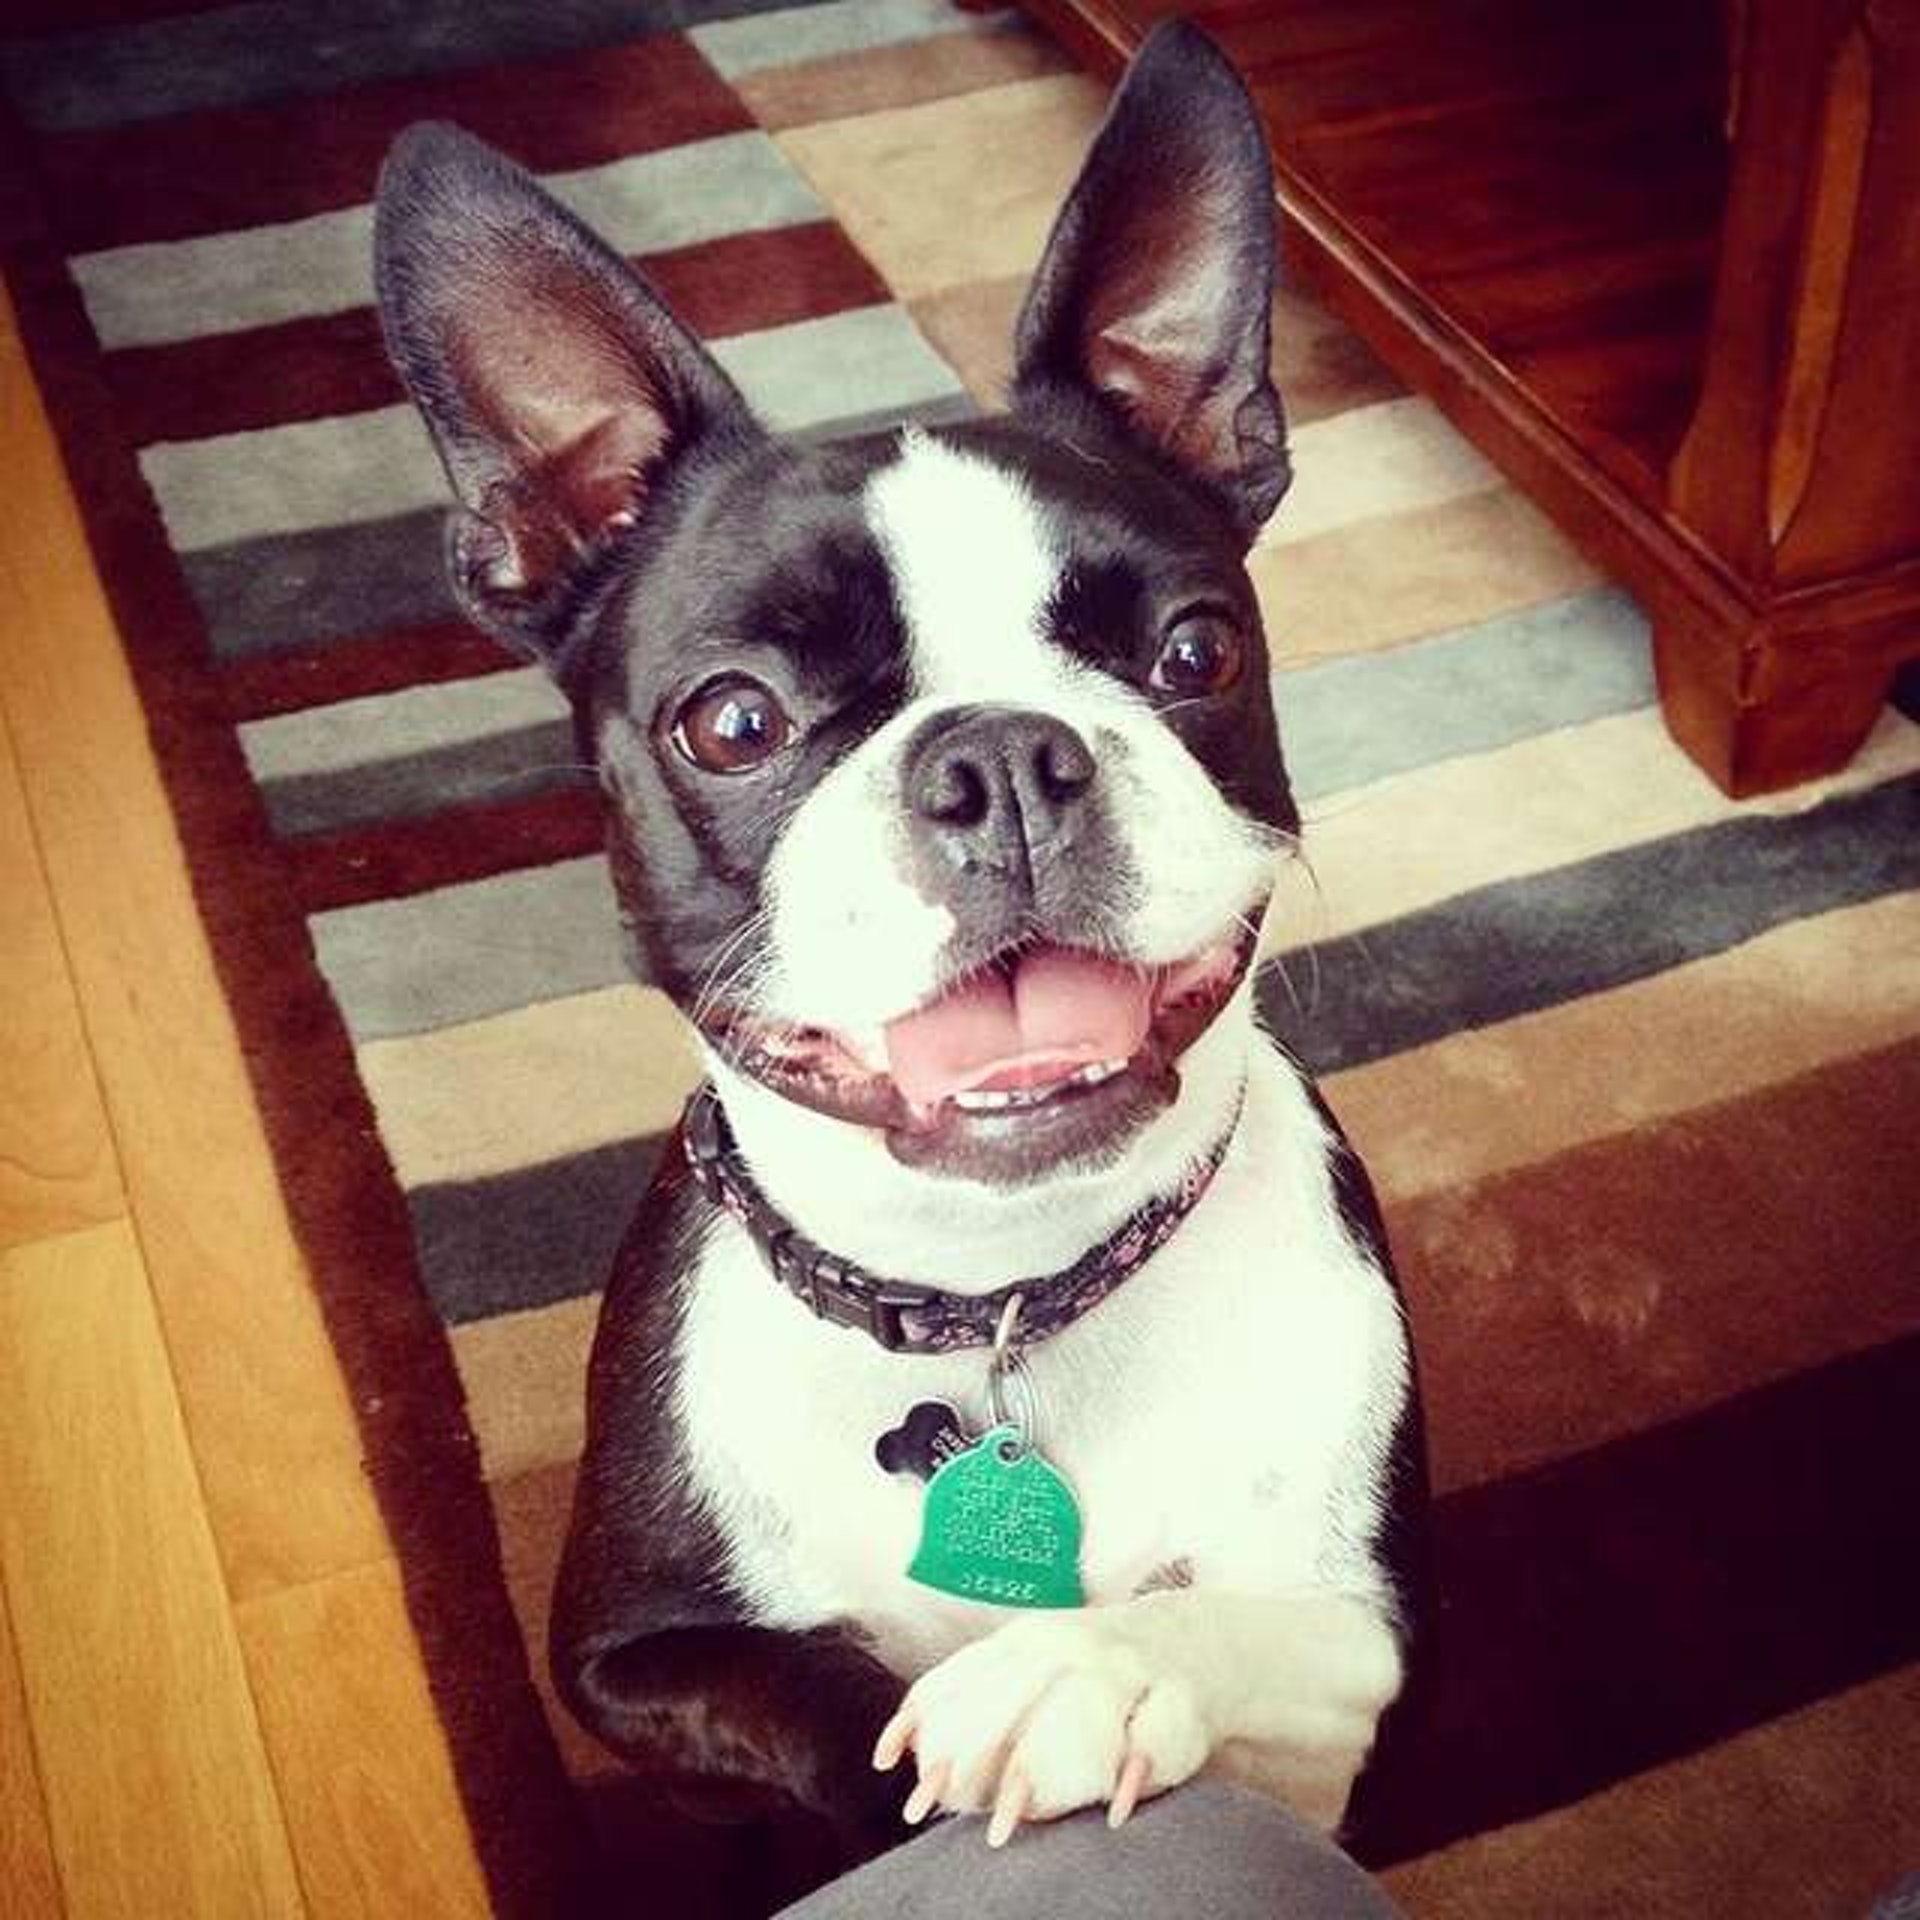 A smiling Boston Terrier standing while leaning towards the leg of a person